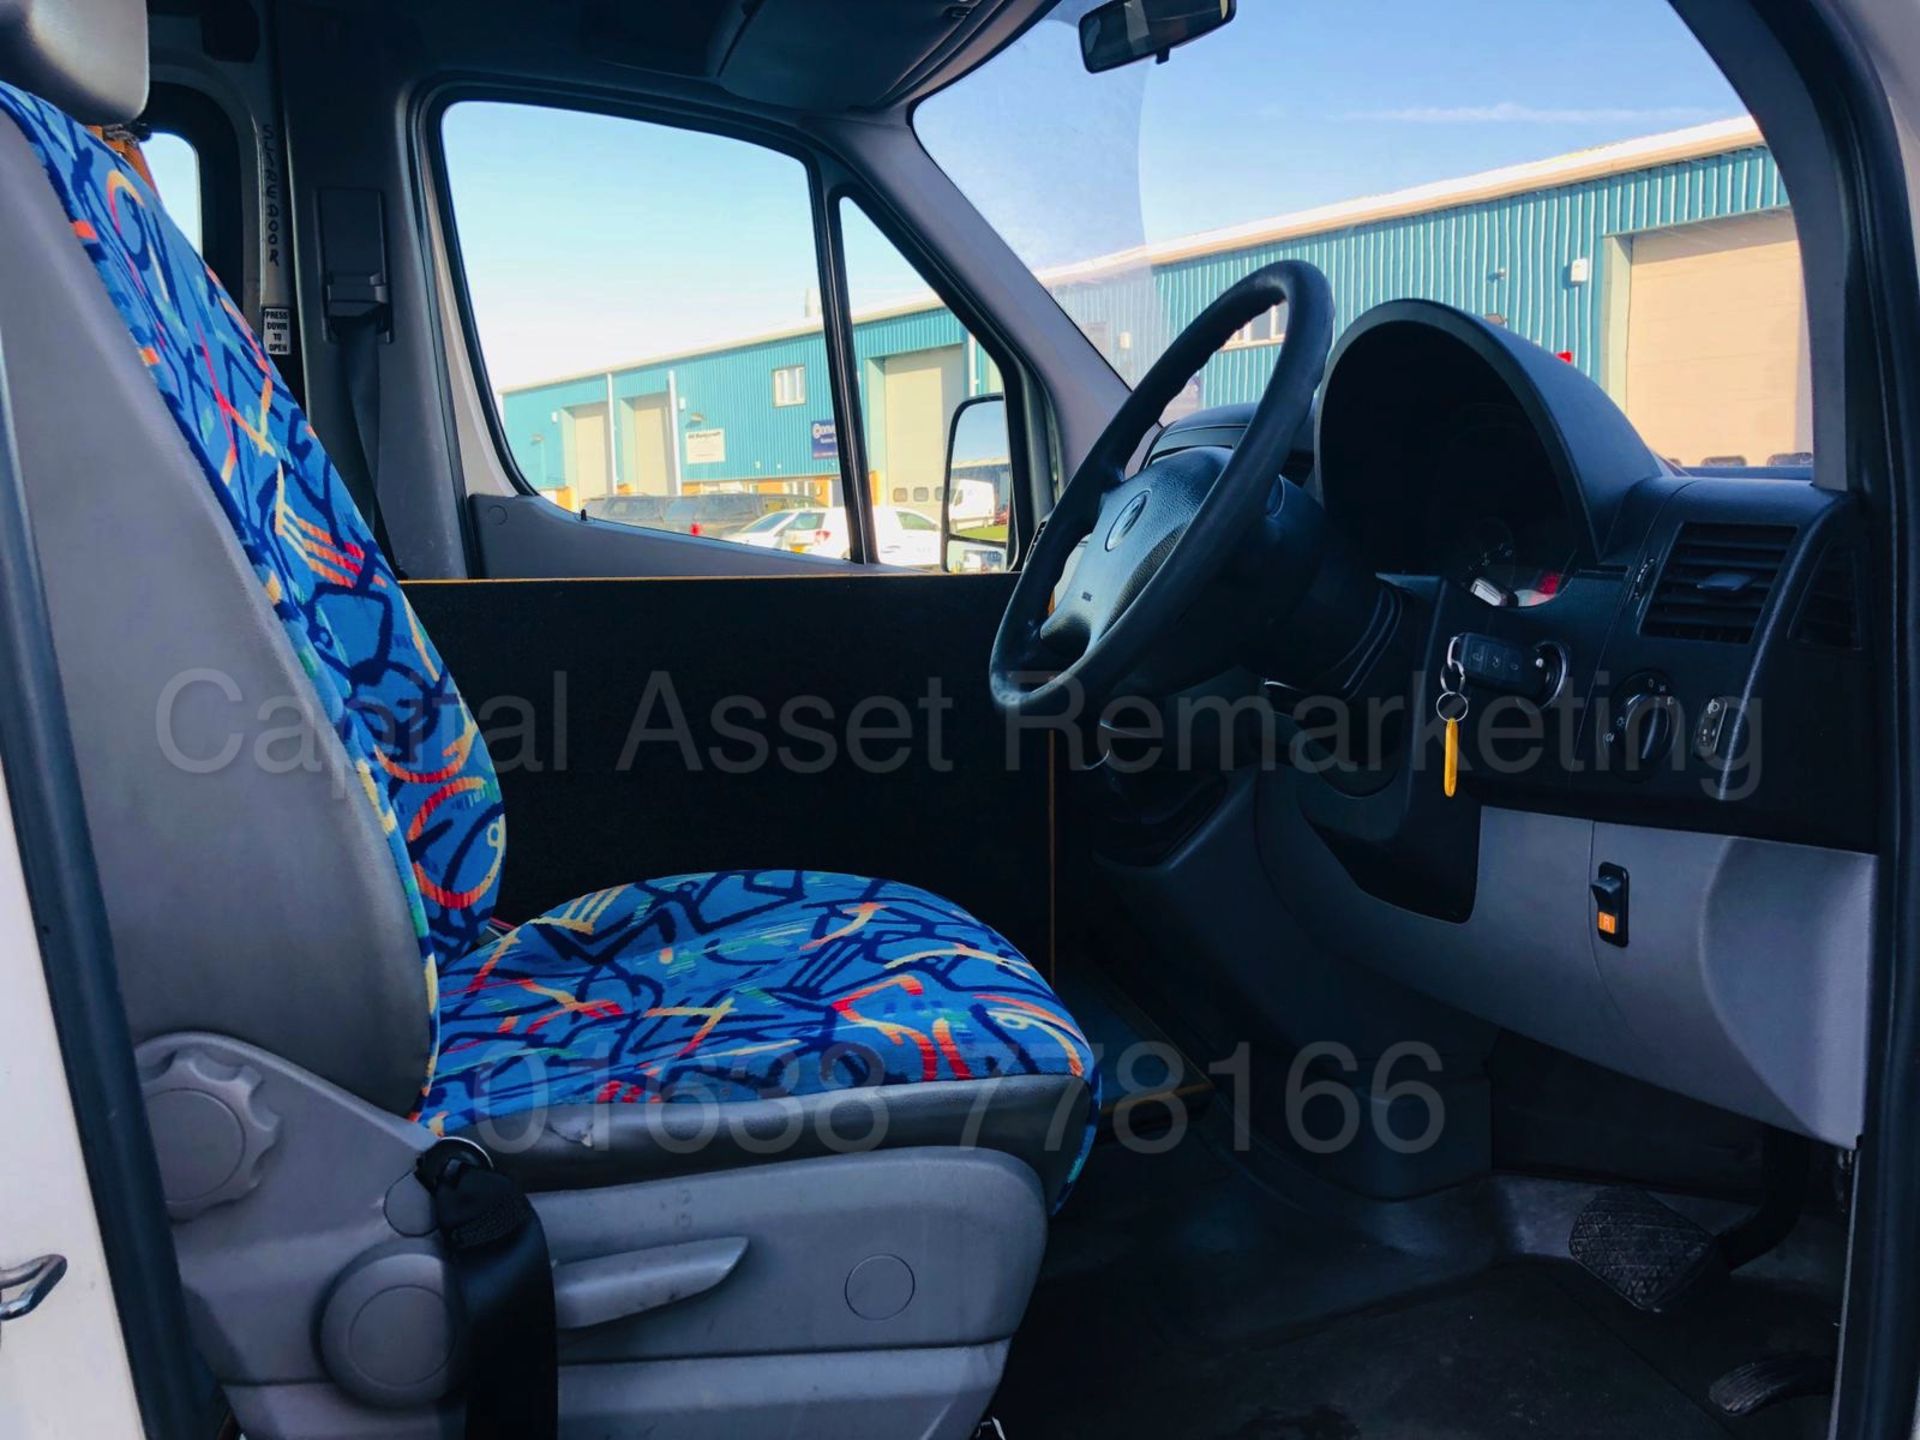 (On Sale) VOLKSWAGEN CRAFTER 2.5 TDI *LWB - 16 SEATER MINI-BUS* (2007) *ELECTRIC WHEEL CHAIR LIFT* - Image 26 of 35